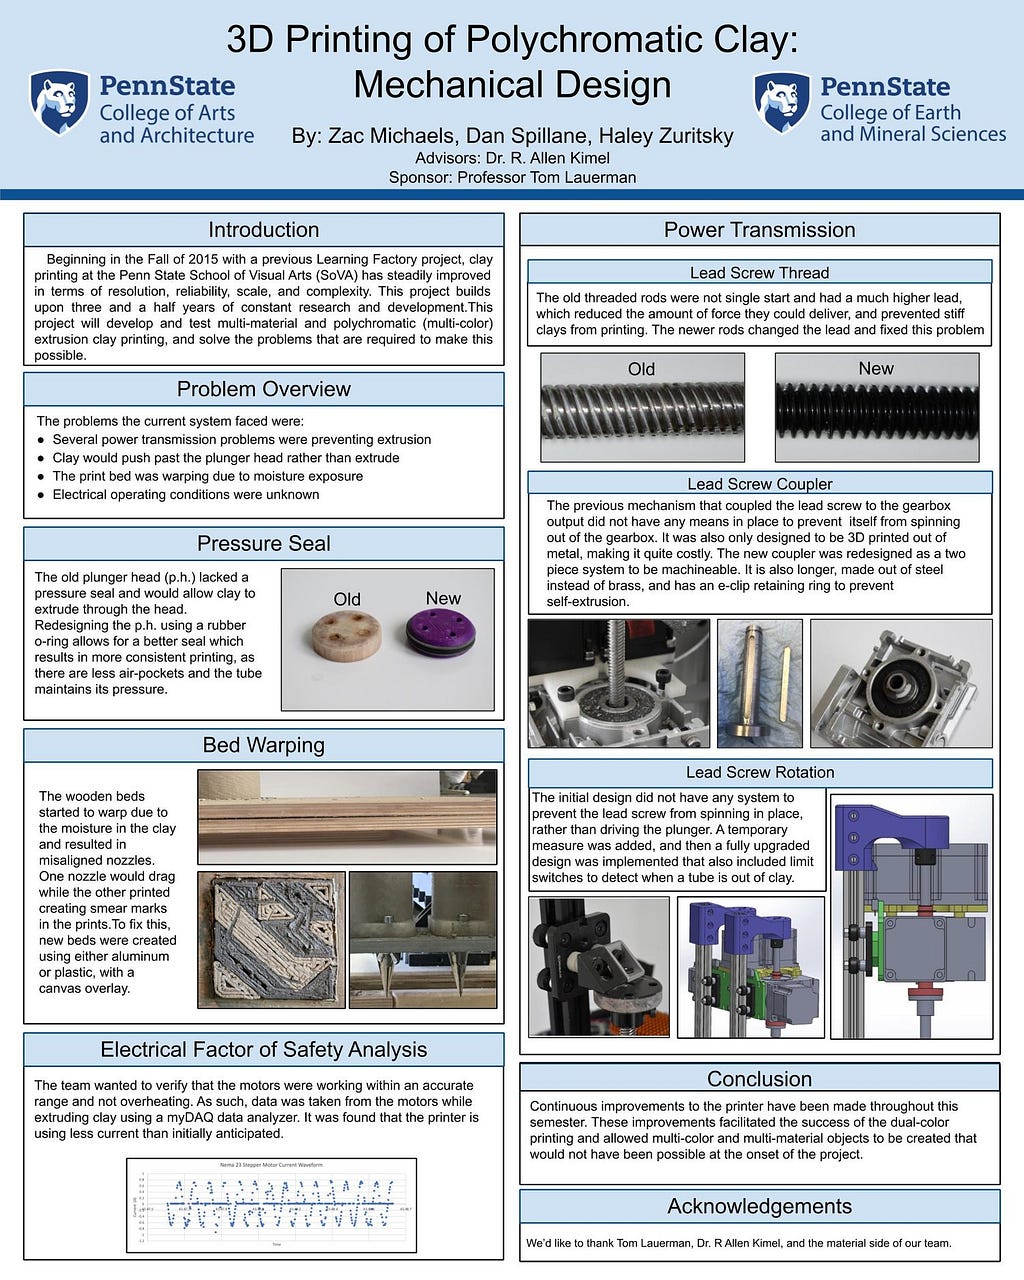 Image of poster outlining work conducted by the “mechanical” side of the team.